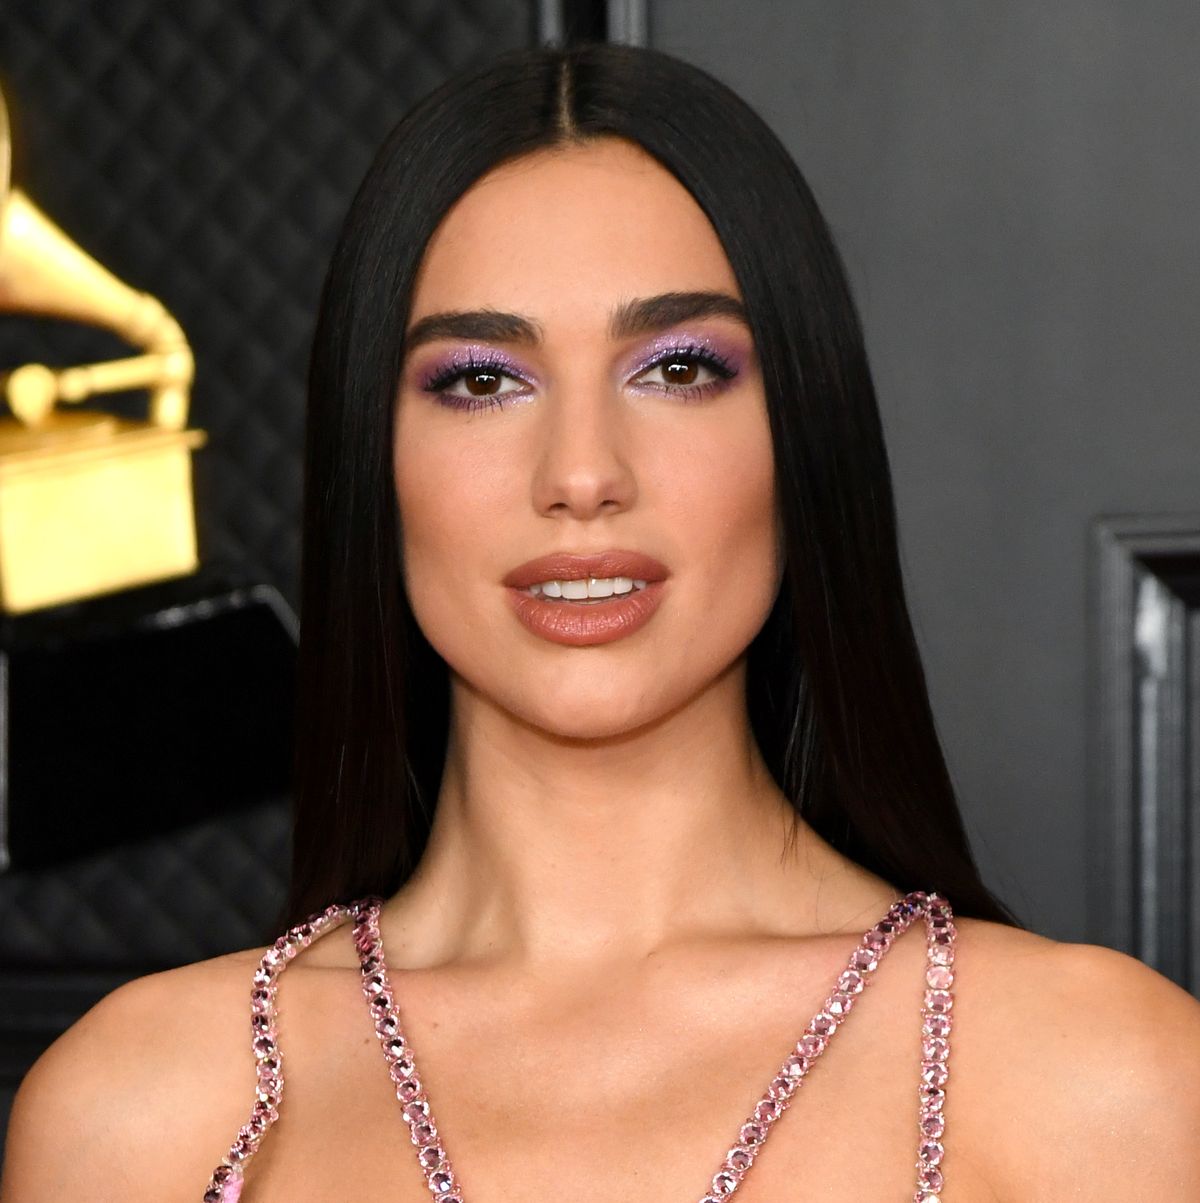 Dua Lipa's 'Matrix'-Inspired Outfit Included a Hood and Glamorous